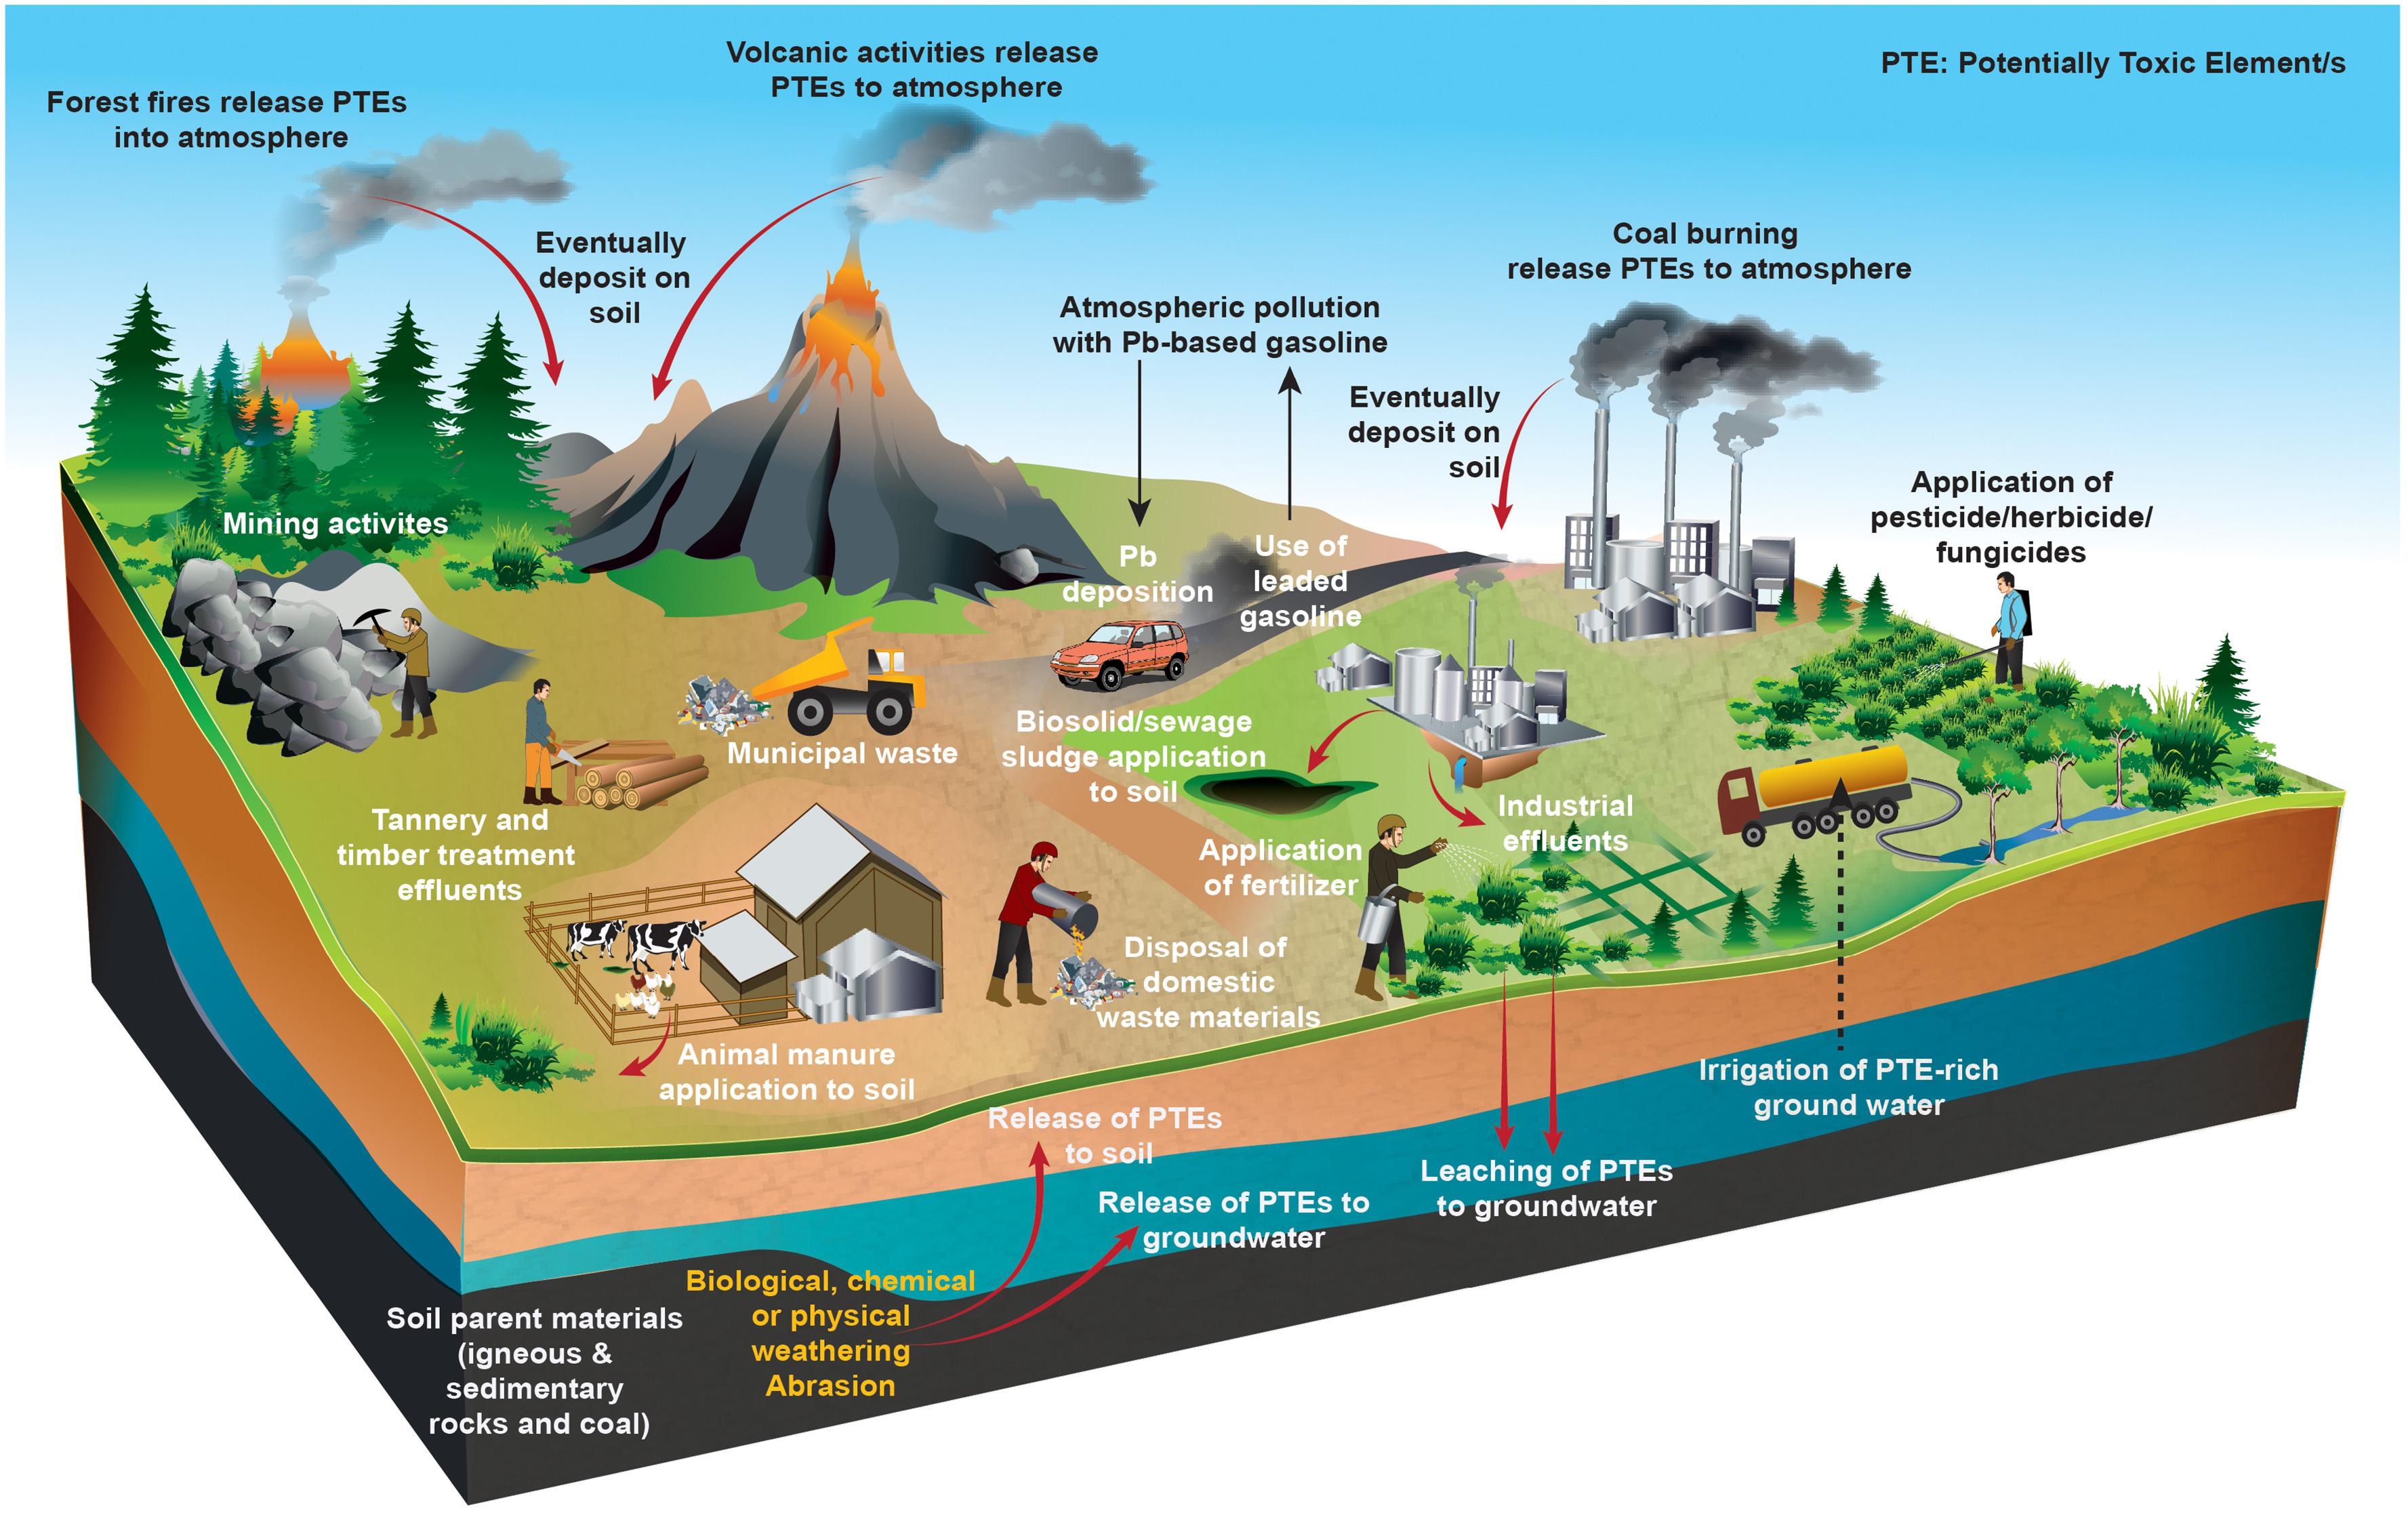 Soil amendments for immobilization of potentially toxic elements in contaminated  soils: A critical review | Sustainable Development Goals - Resource Centre